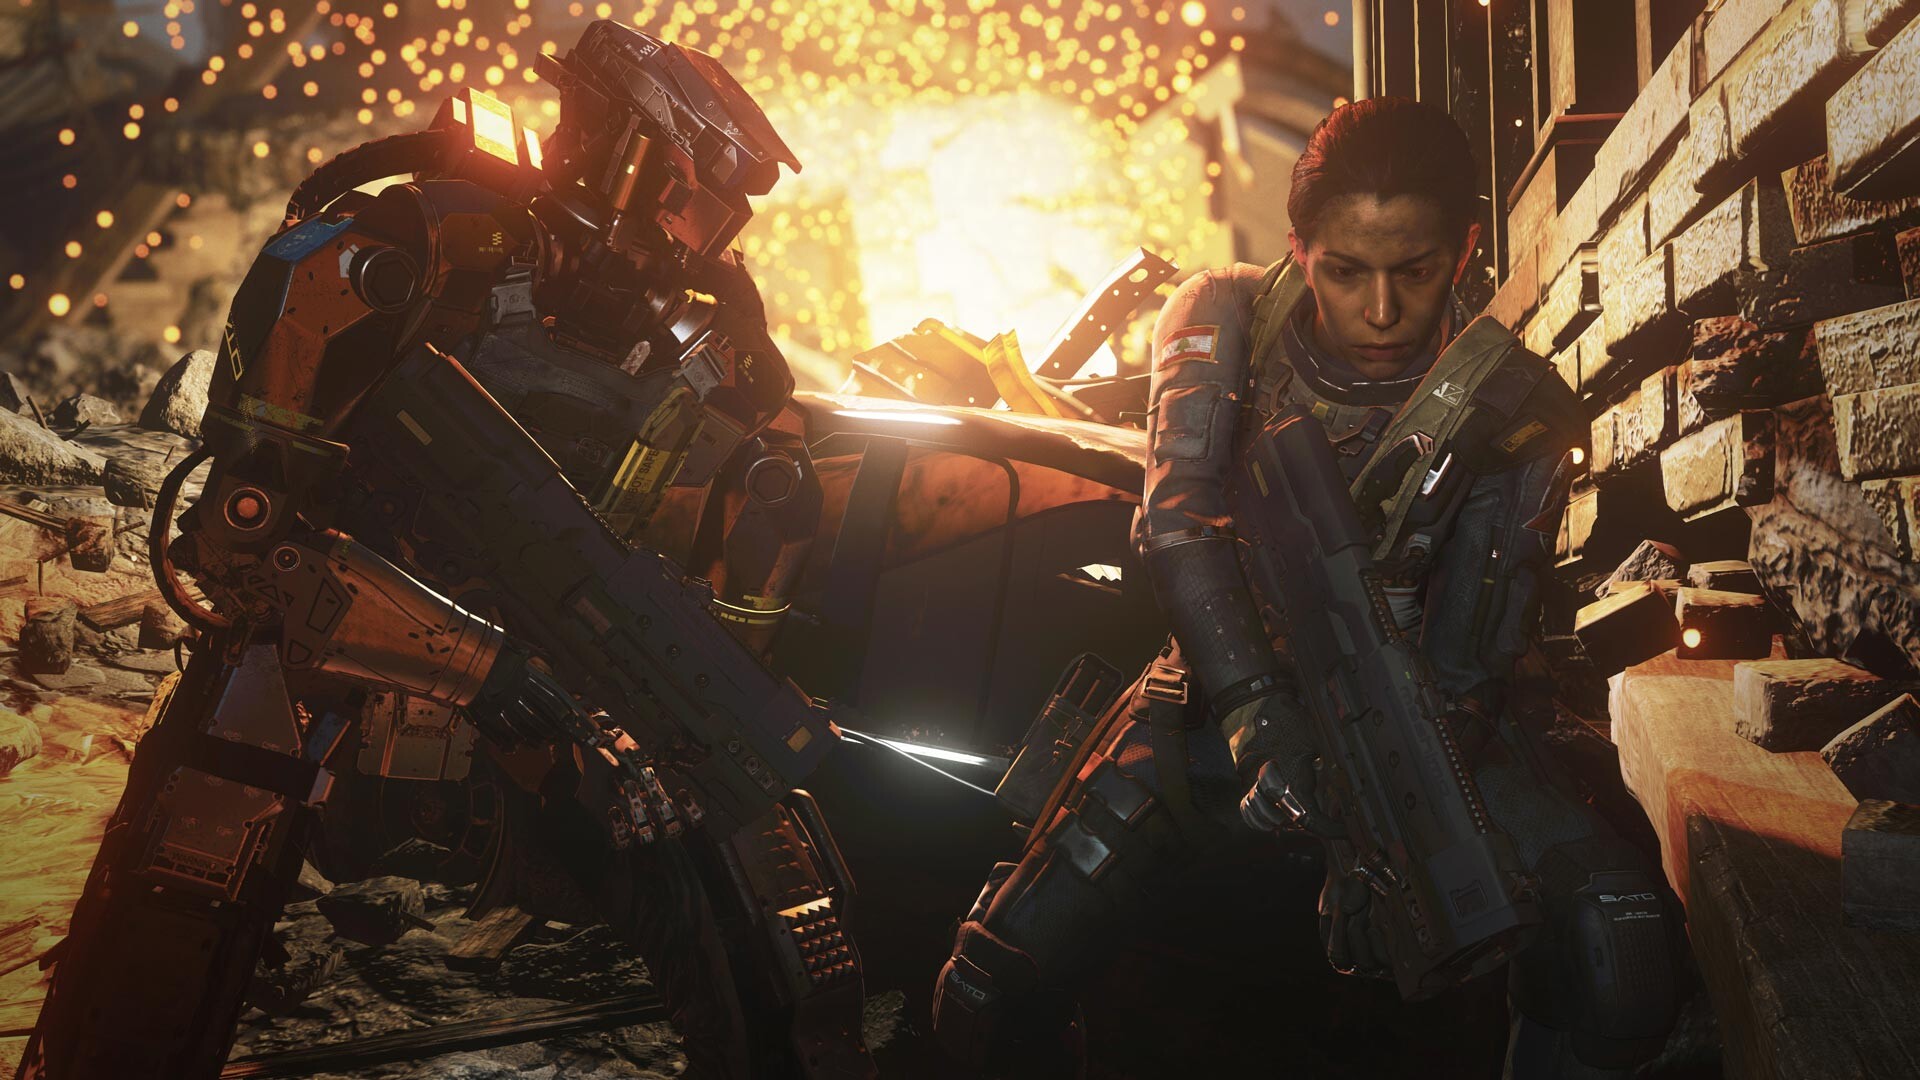 You can now play Call of Duty: Black Ops 2 on Xbox One - G2A News